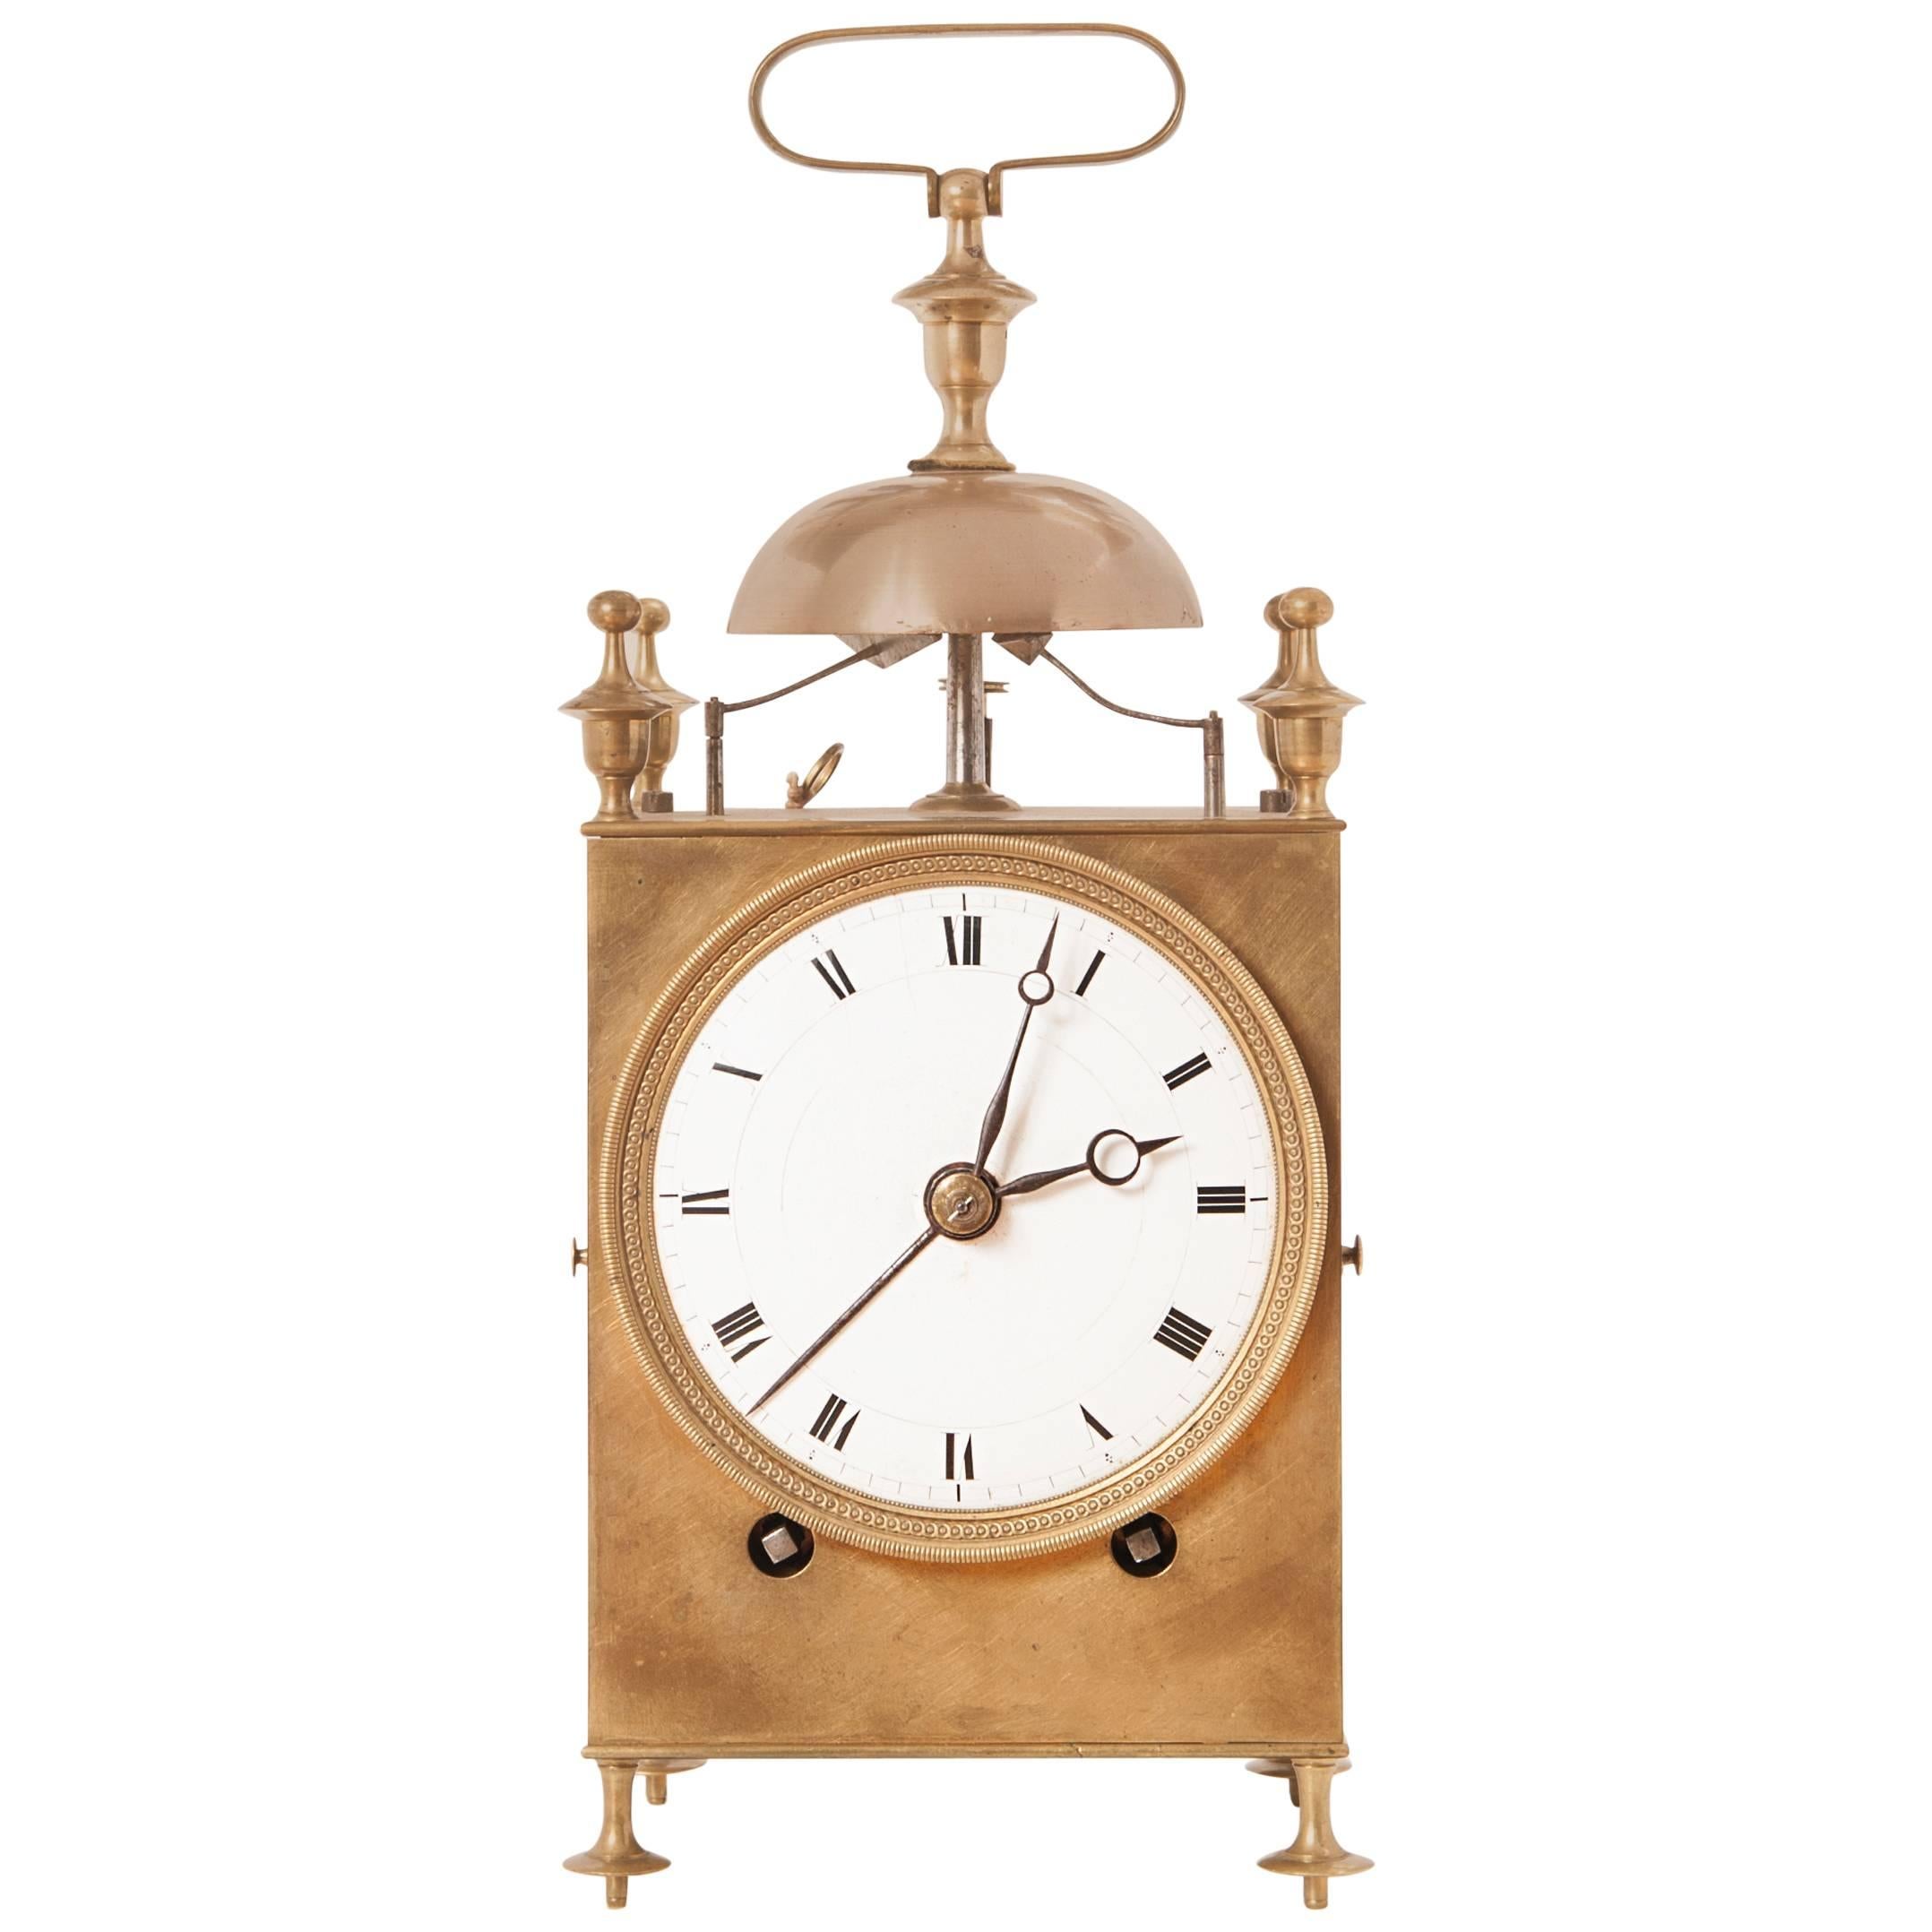 Good Early 19th Century French Striking Traveling Clock So-Called "Capucine" For Sale